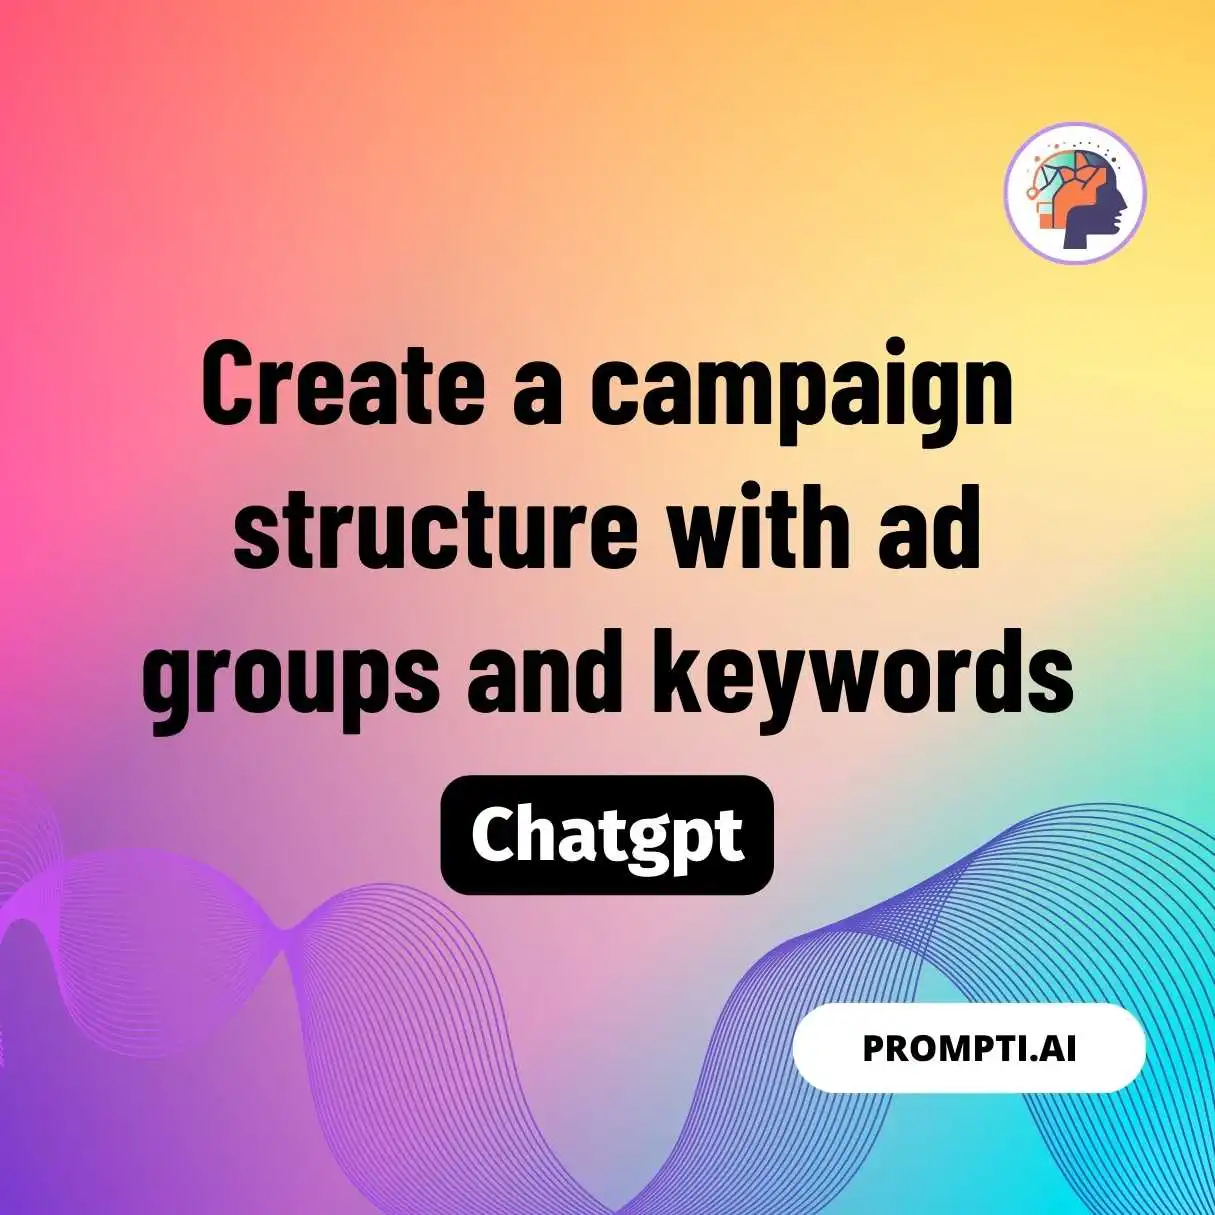 Create a campaign structure with ad groups and keywords